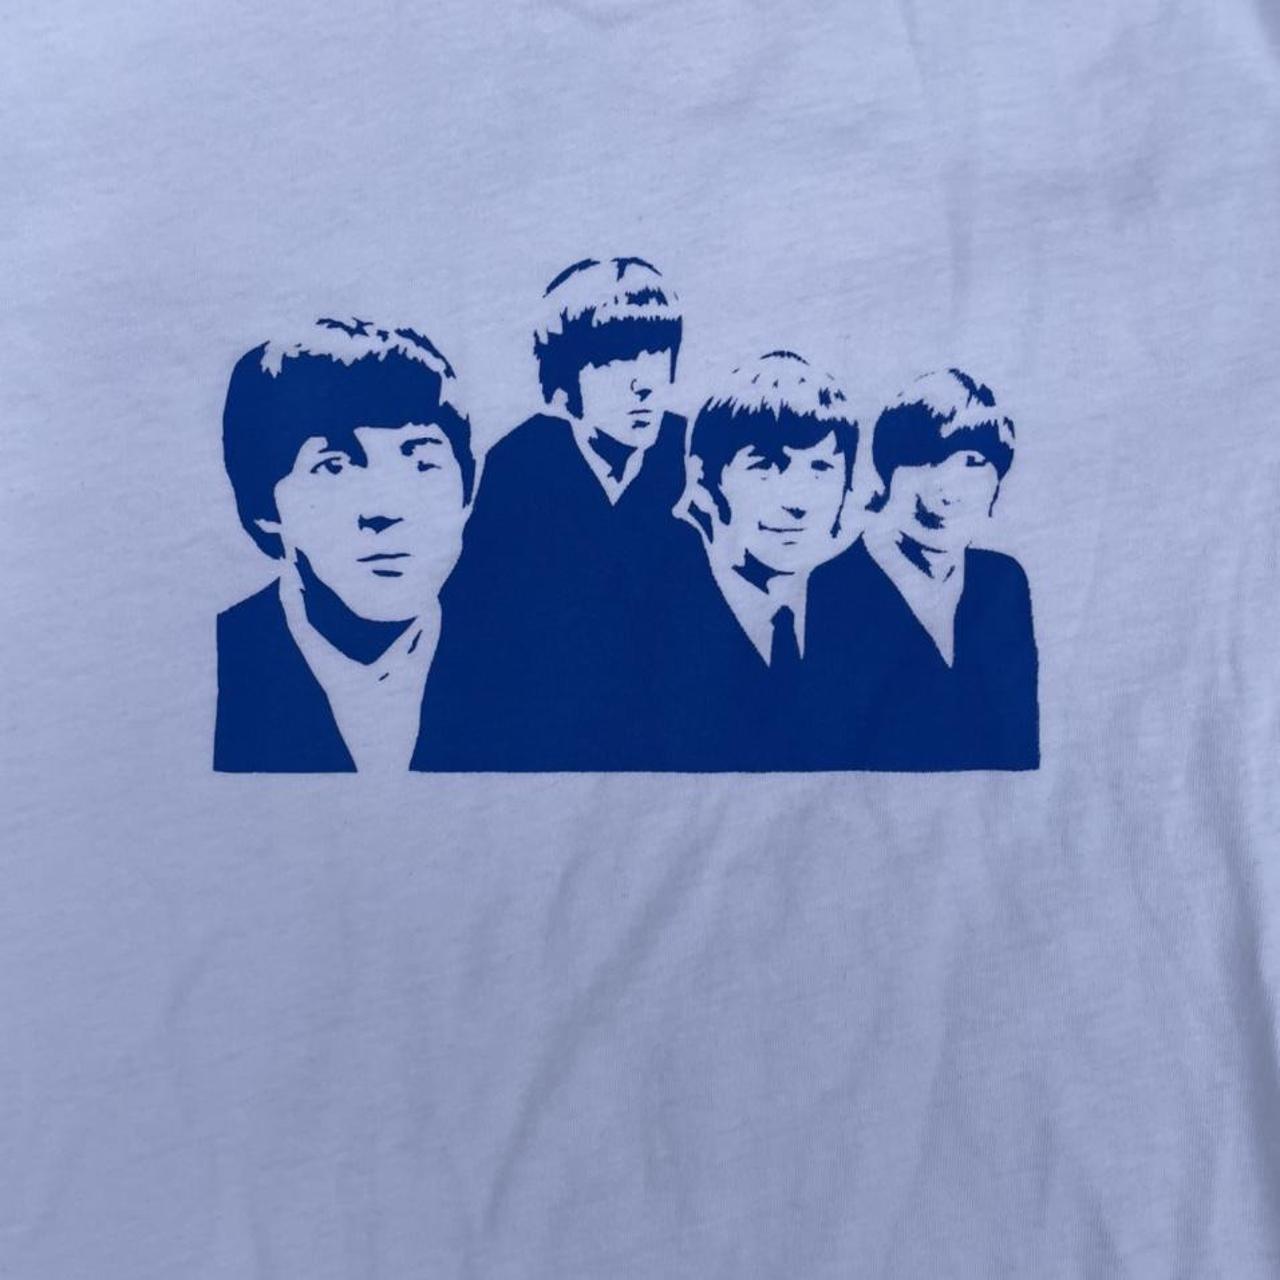 Product Image 2 - Beatles Screen Printed Tee🎼
Size- youth